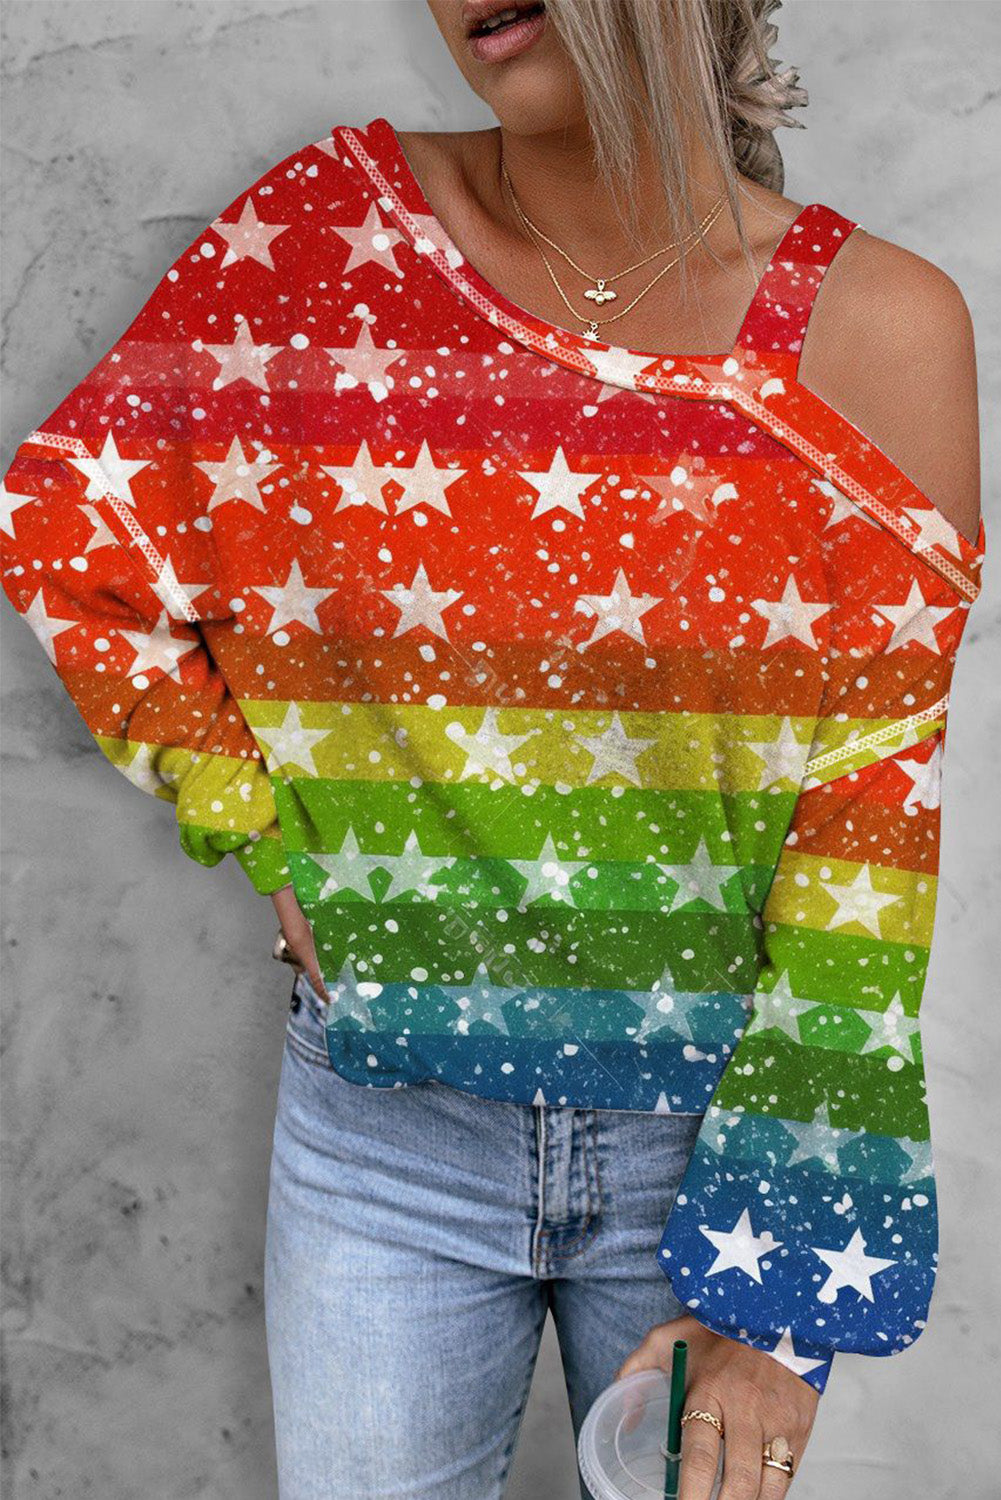 LC2569568-22-S, LC2569568-22-M, LC2569568-22-L, LC2569568-22-XL, LC2569568-22-2XL, Multicolor Womens Star Rainbow Striped Print Long Sleeve Cold Shoulder Shirt